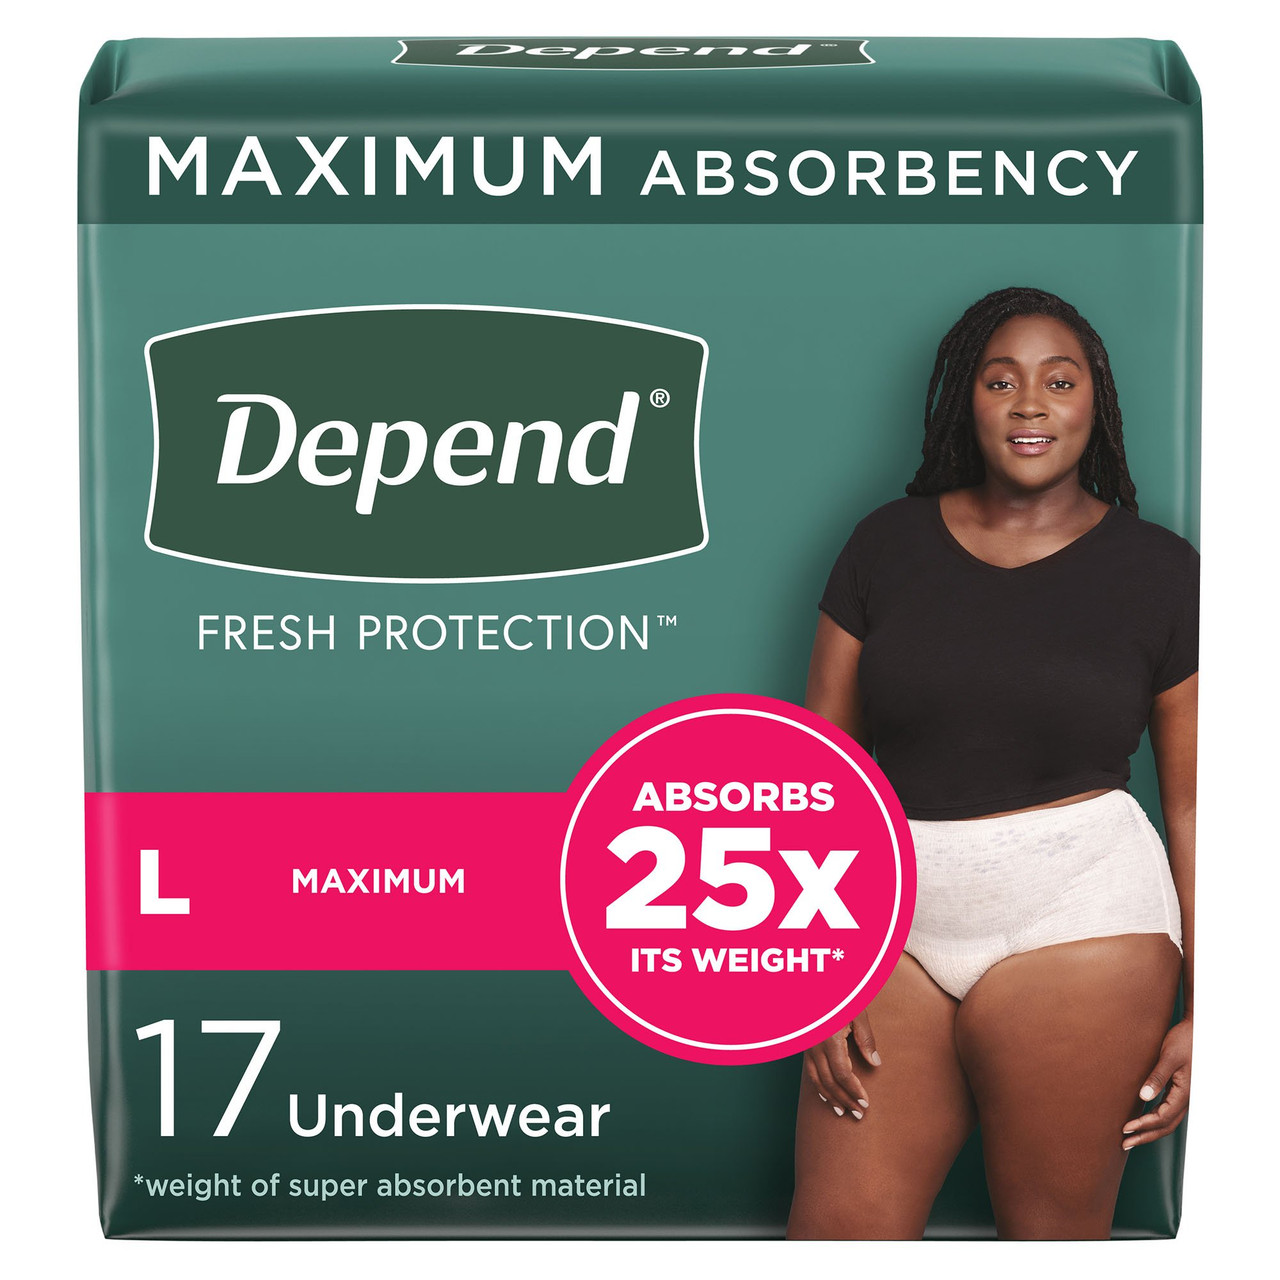 Depend Silhouette Incontinence Shapewear Underwear for Women, Pull-Up Max  Abs.